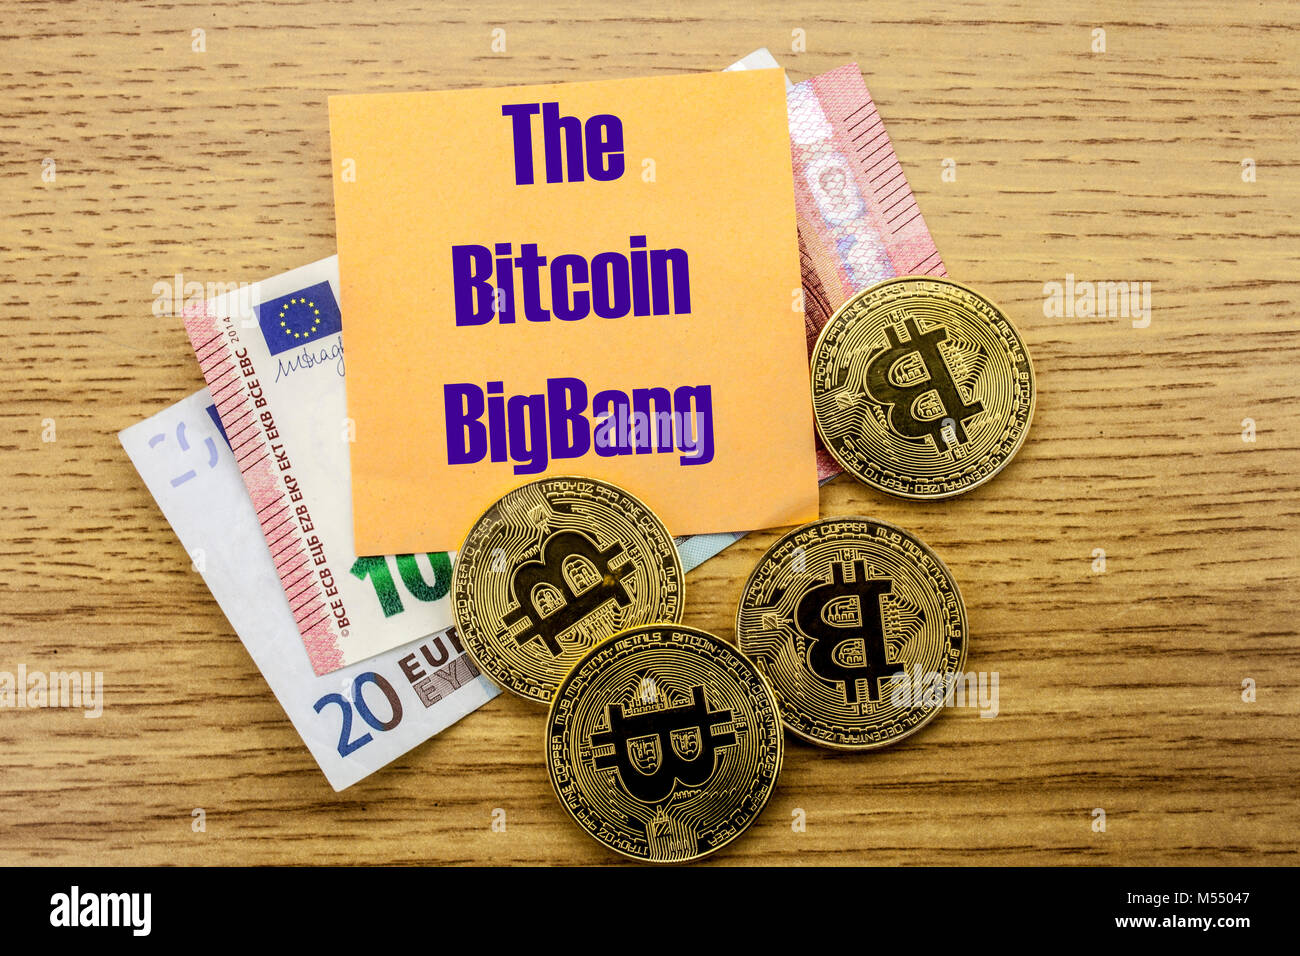 Bitcoins, Bit Coin on Euro, Dollars notes witch sticky note on wooden background,THE BITCOIN BIGBANG bitcoin concept. Stock Photo